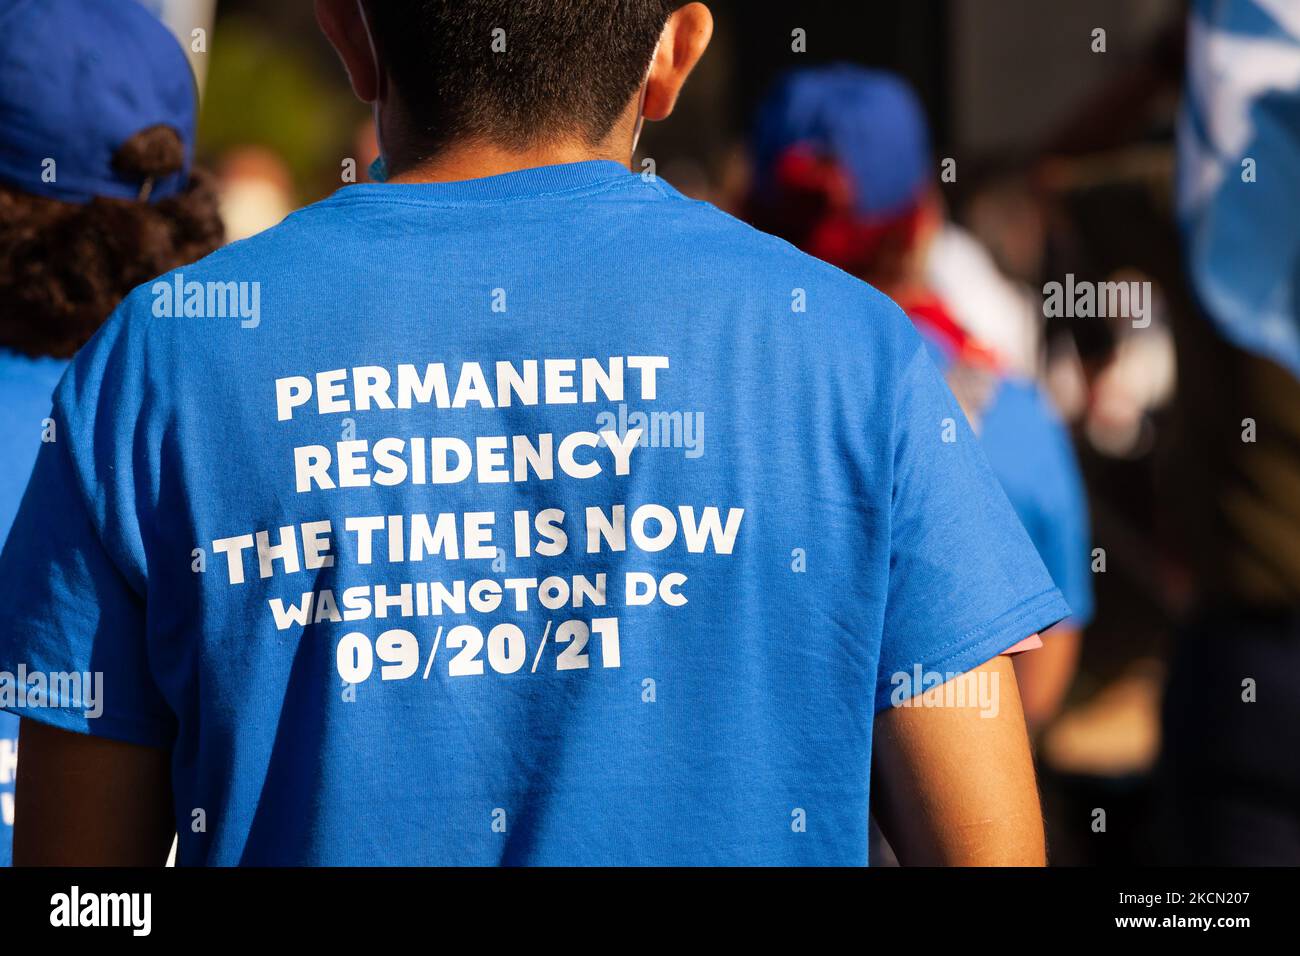 A man wears a shirt made for a march for permanent residency for immigrants with temporary protected status in the US. Protesters are pressuring Congress to include permanent status for TPS holders, Dreamers, temporary workers, and essential workers in the budget reconciliation bill currently underway consideration. This task has taken on greater urgency since the Senate parliamentarian’s recommendation that residency and citizenship be excluded from the bill. (Photo by Allison Bailey/NurPhoto) Stock Photo